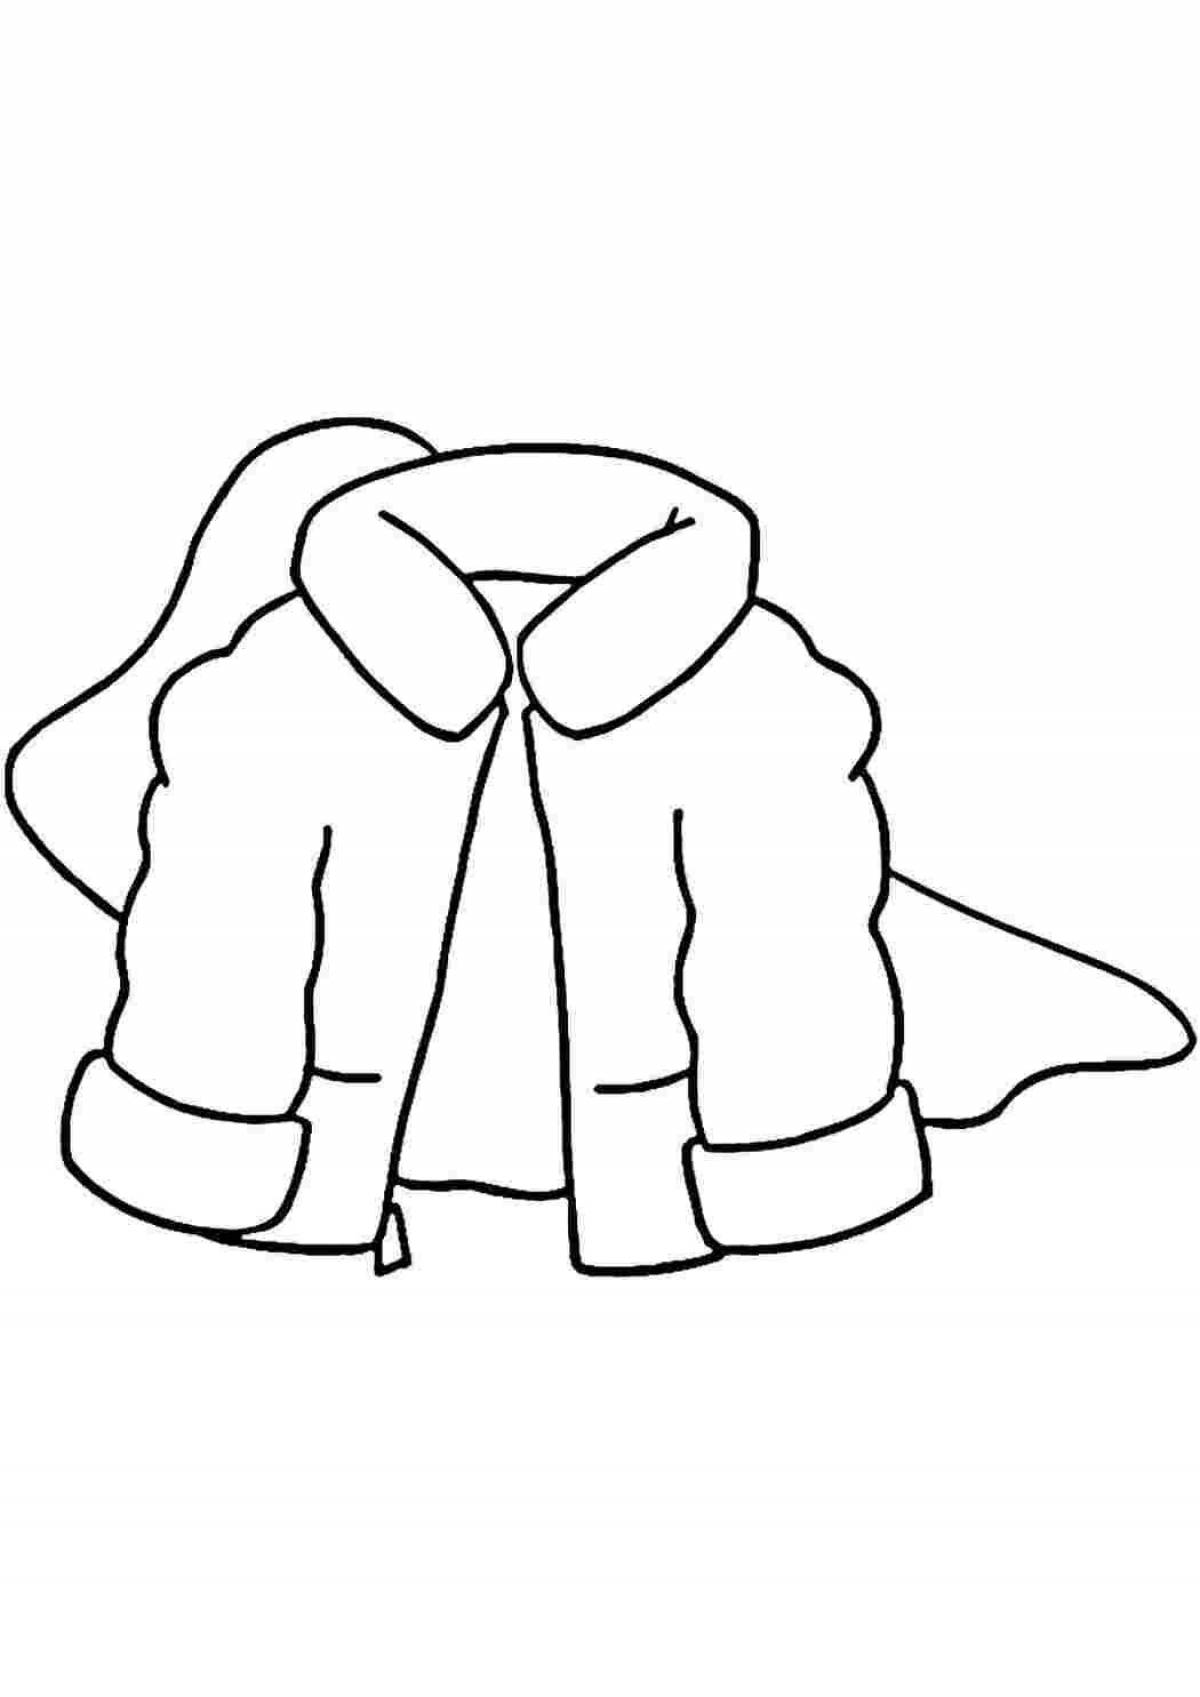 Joyful winter clothes coloring pages for kids